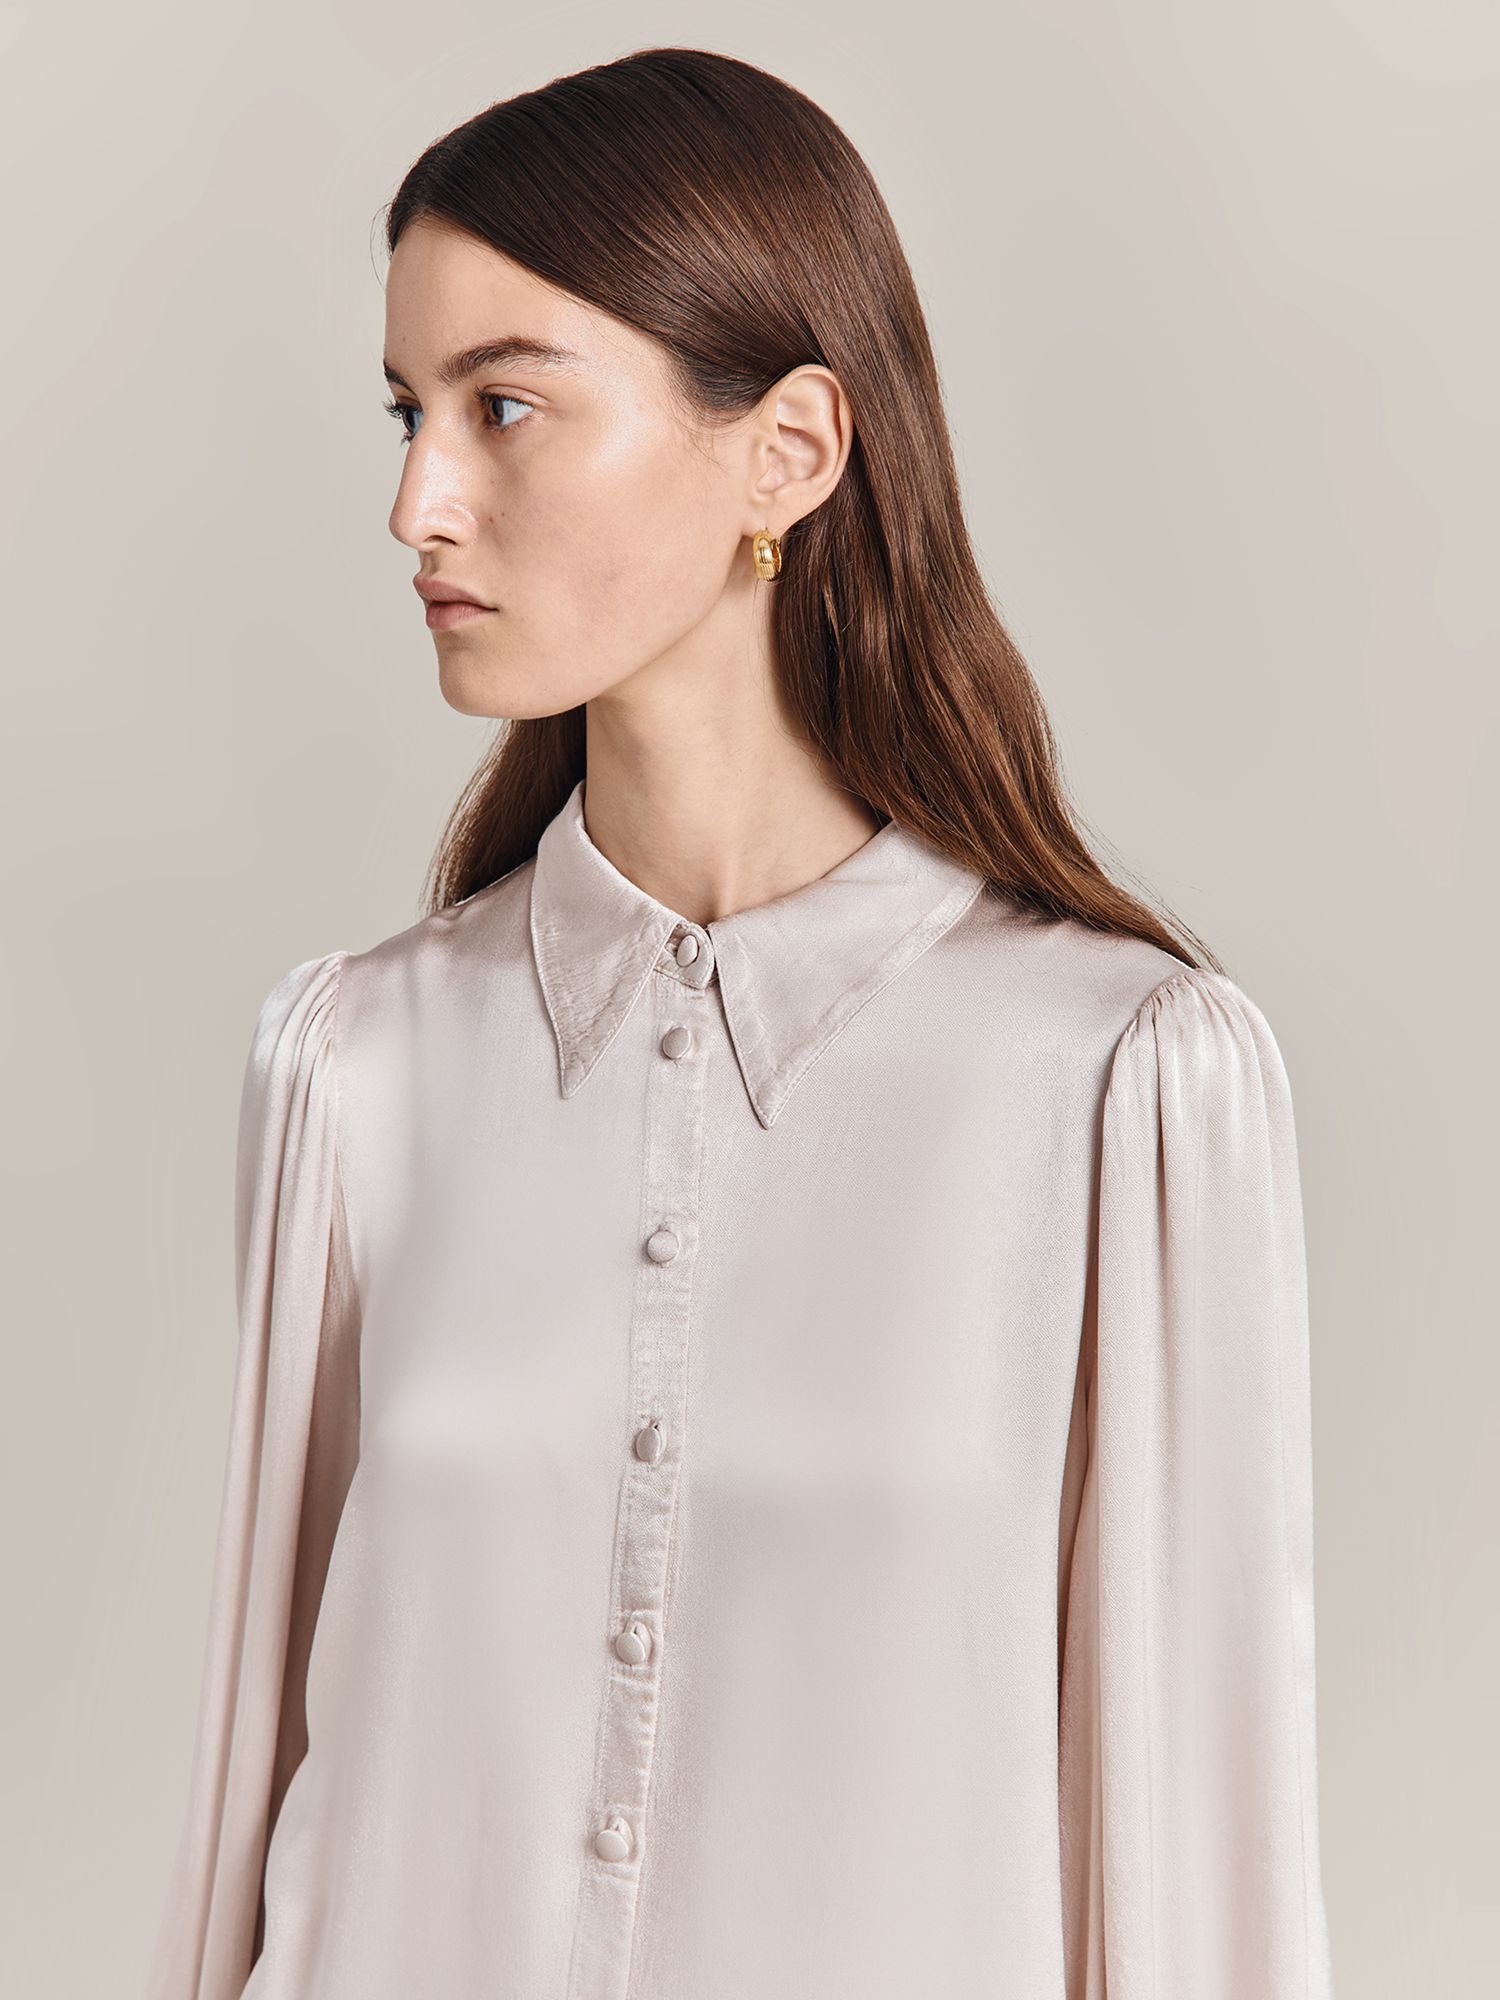 Ghost Alice Pointed Collar Satin Shirt, Beige at John Lewis & Partners